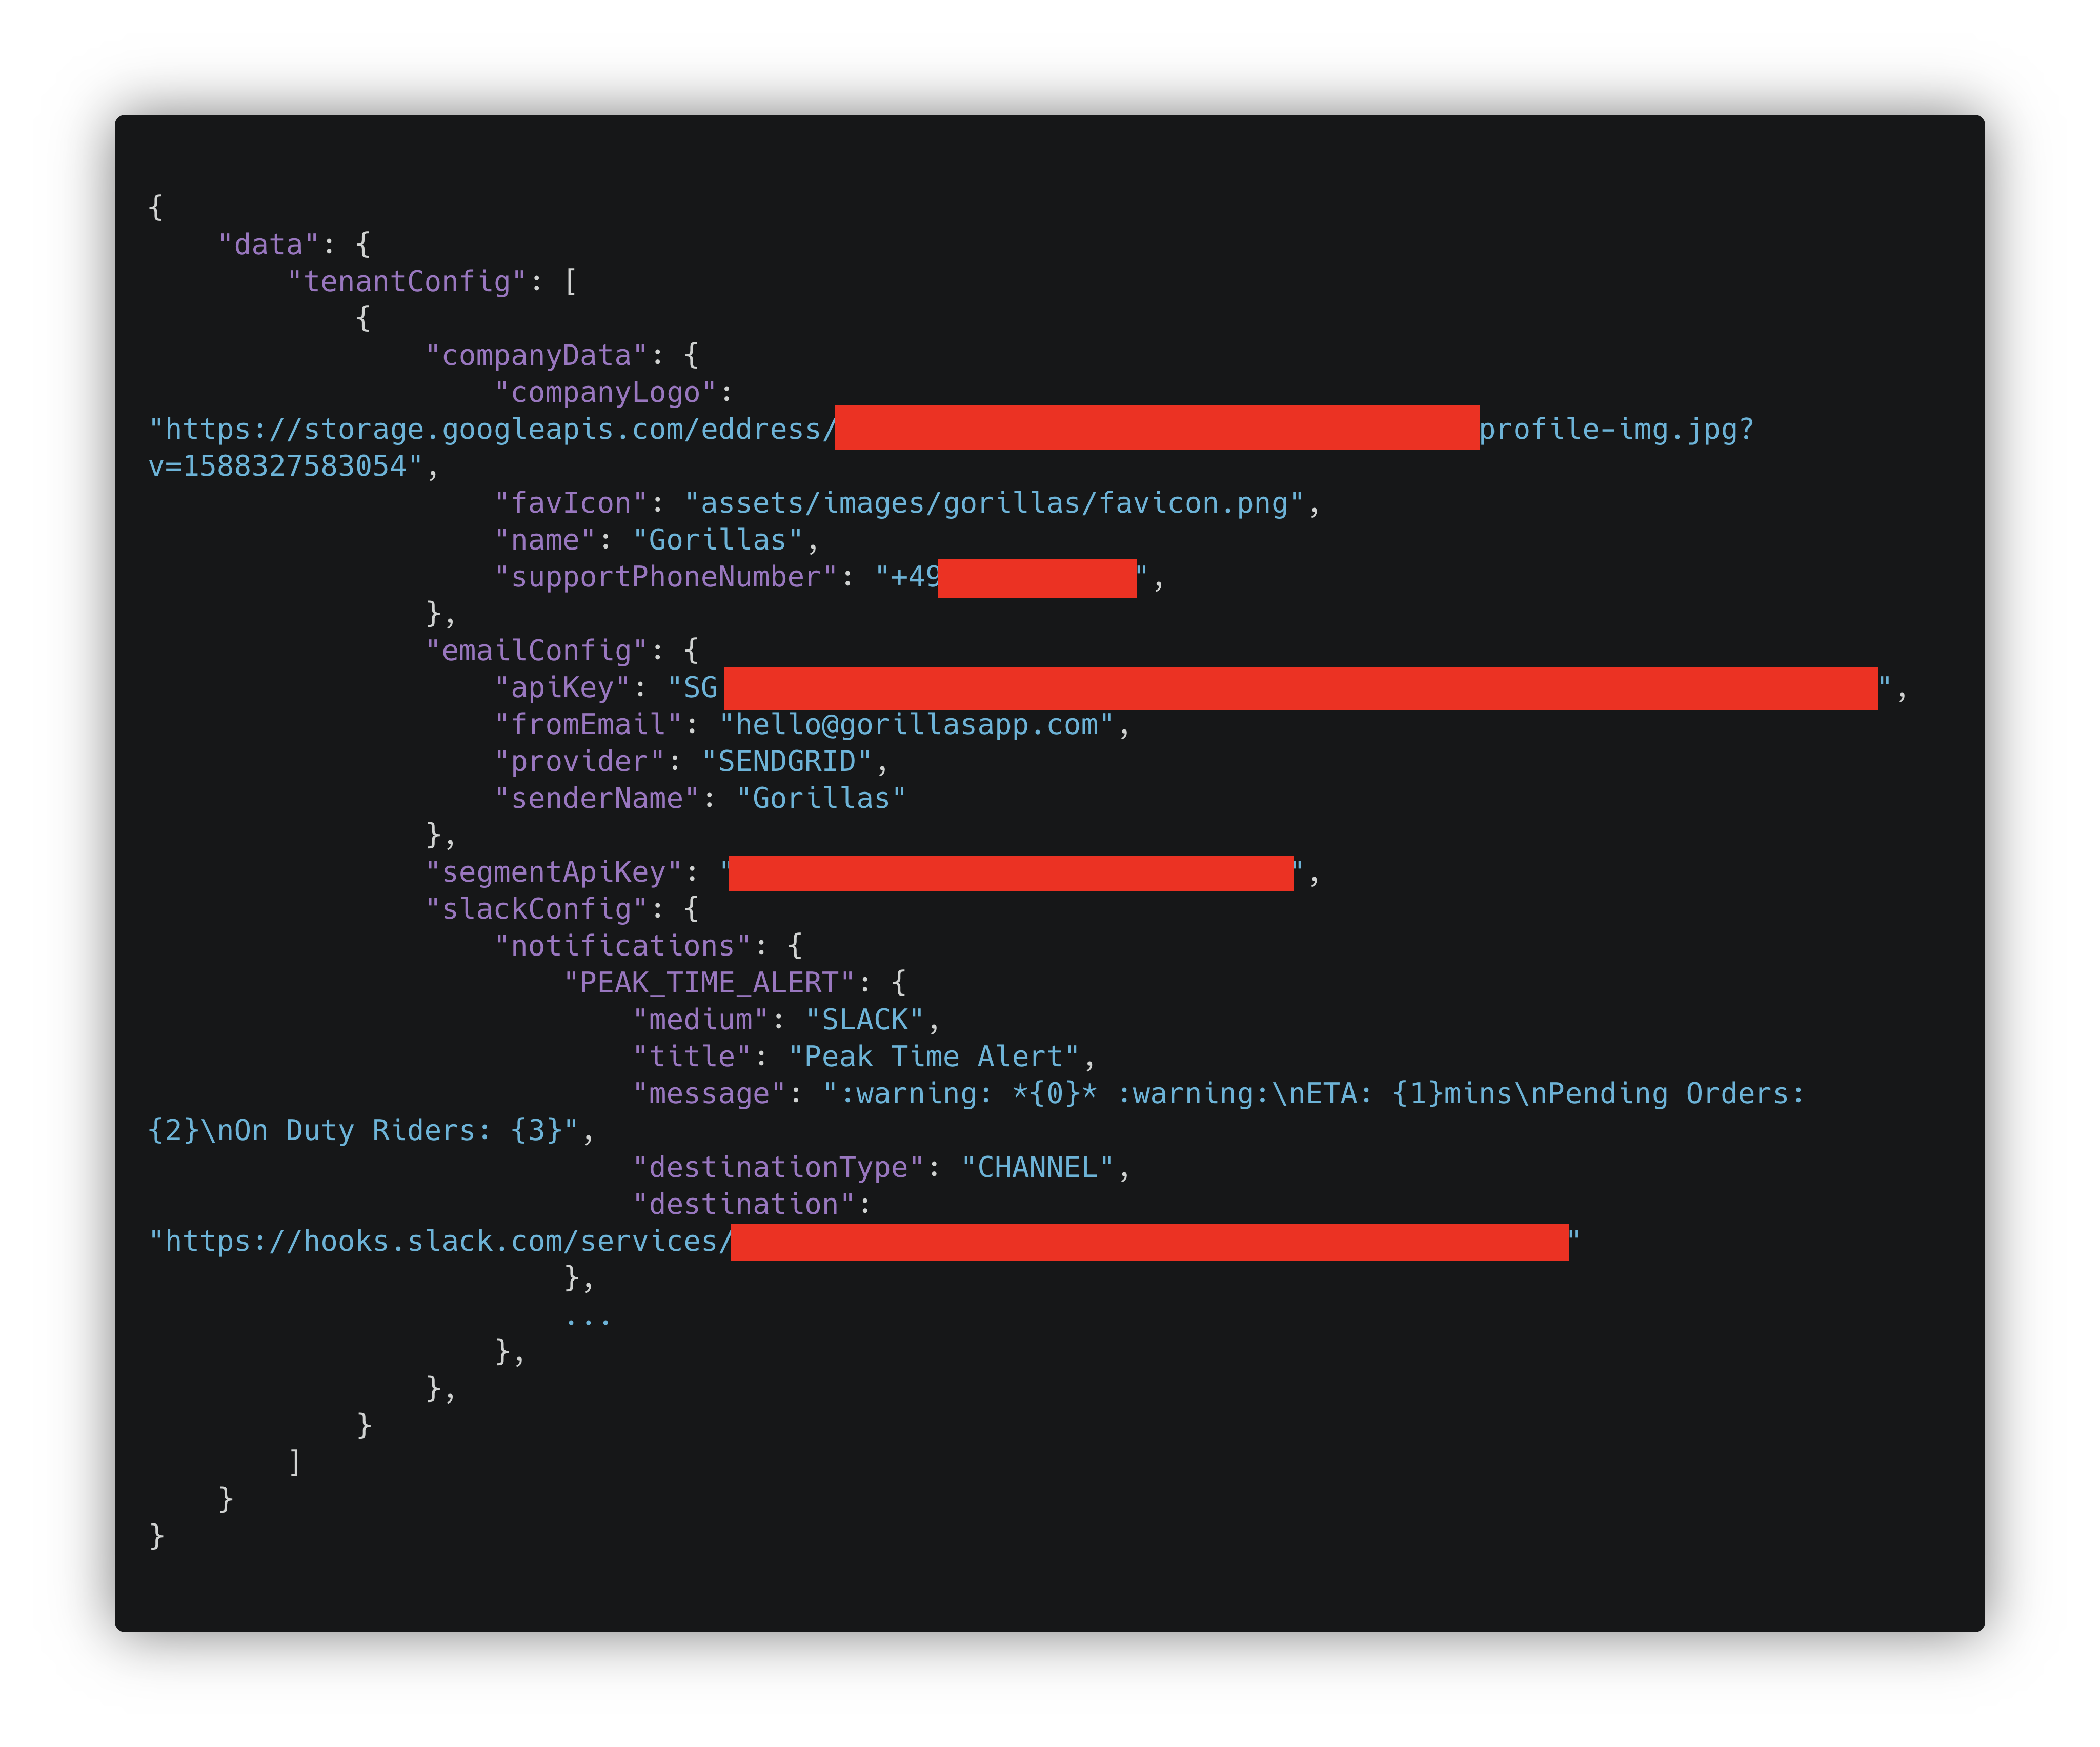 GraphQL API Response, the data shows objects like 'emailConfig' with apiKey, sender email address and 'slackConfig'